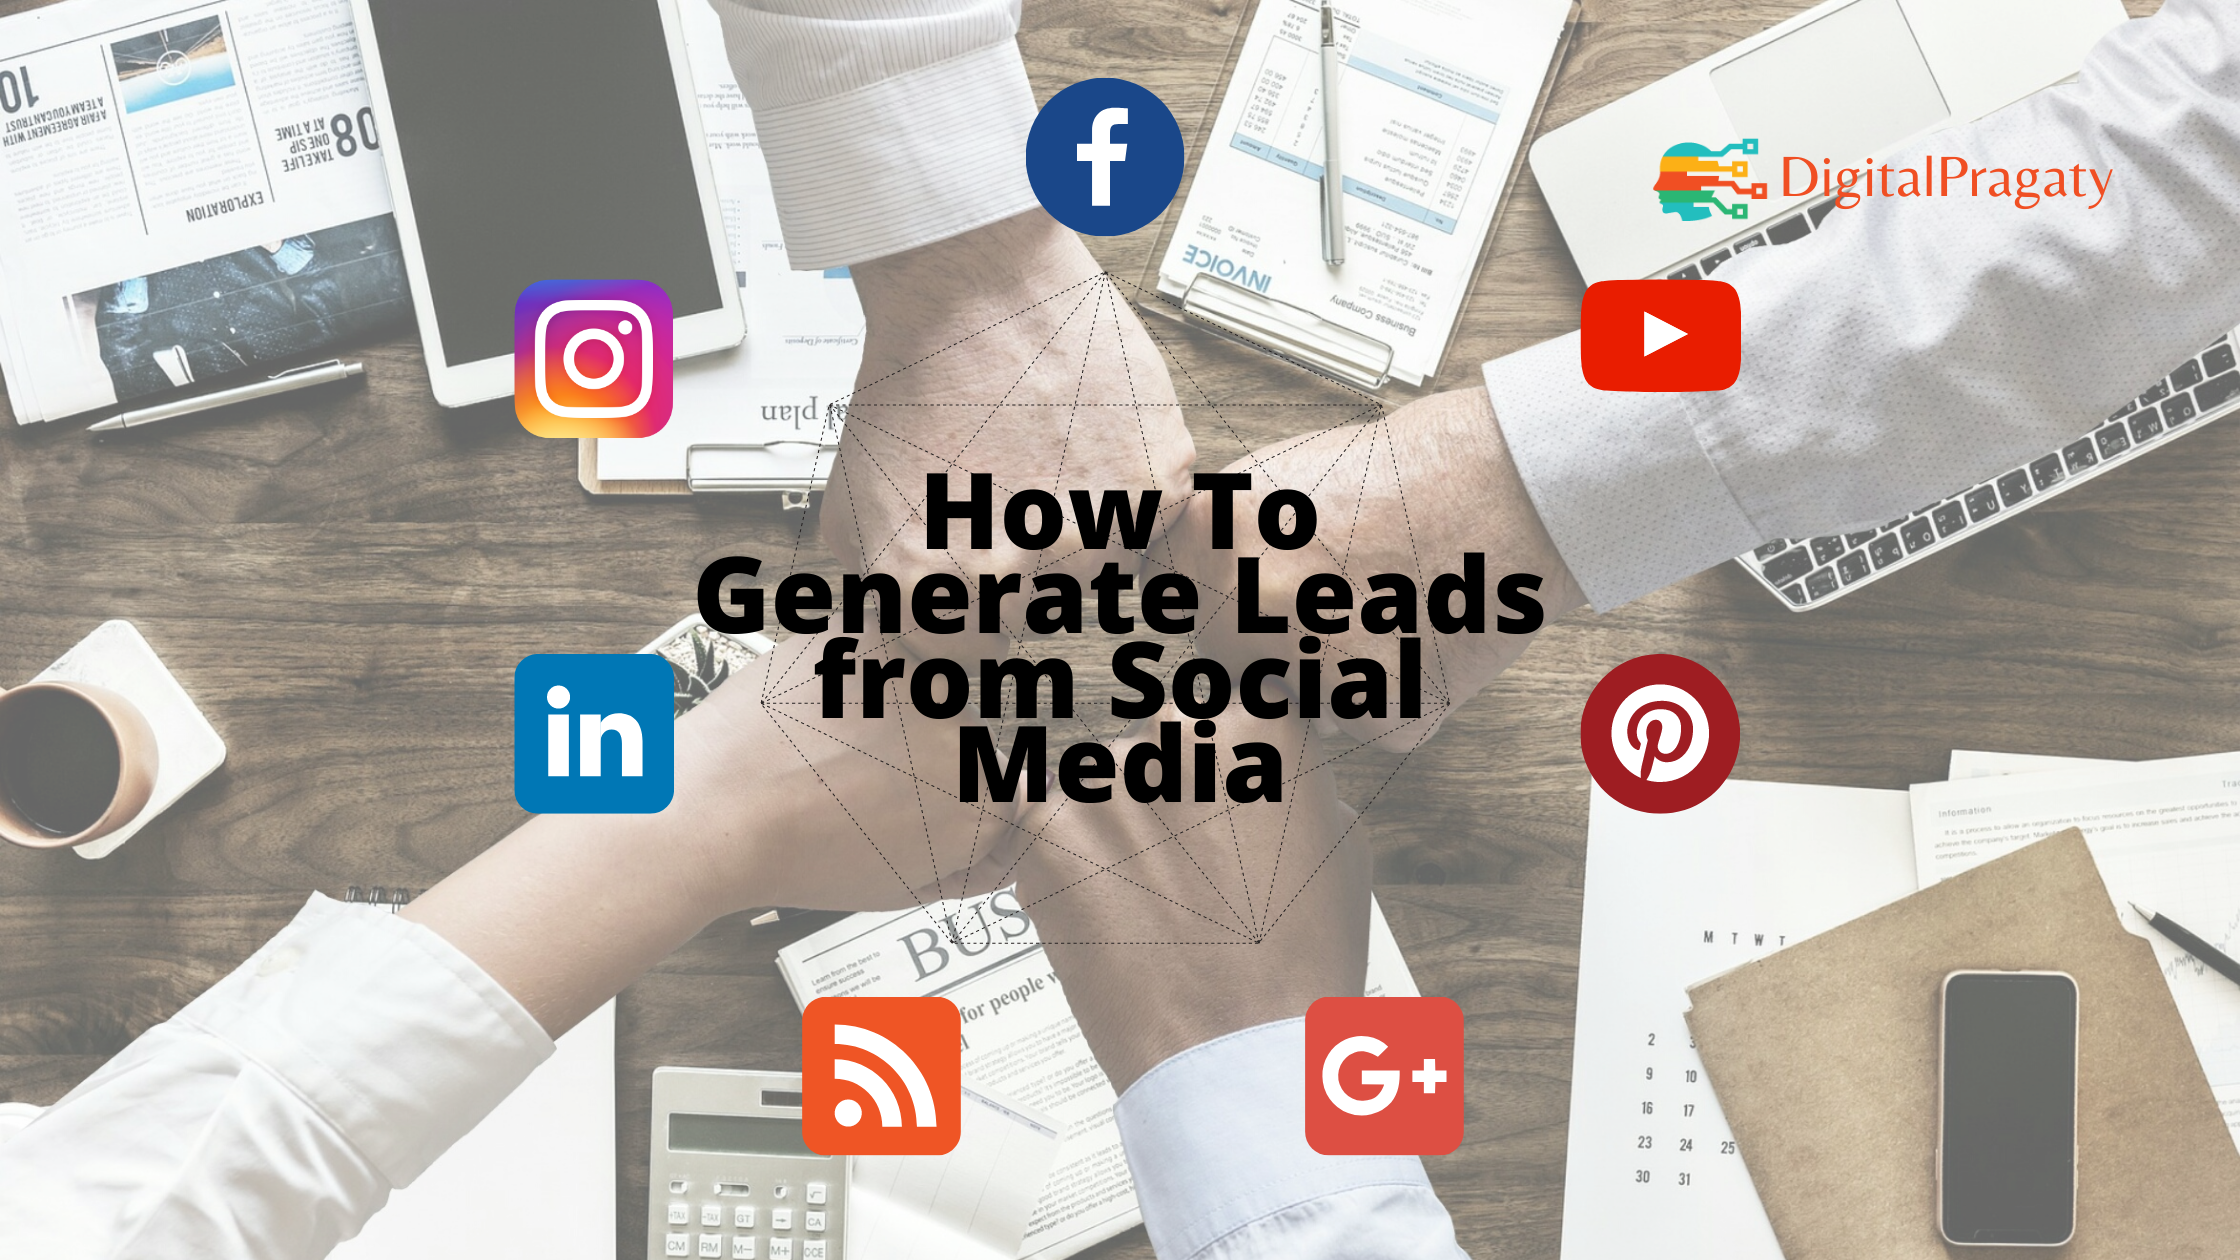 How To Generate Leads from Social Media